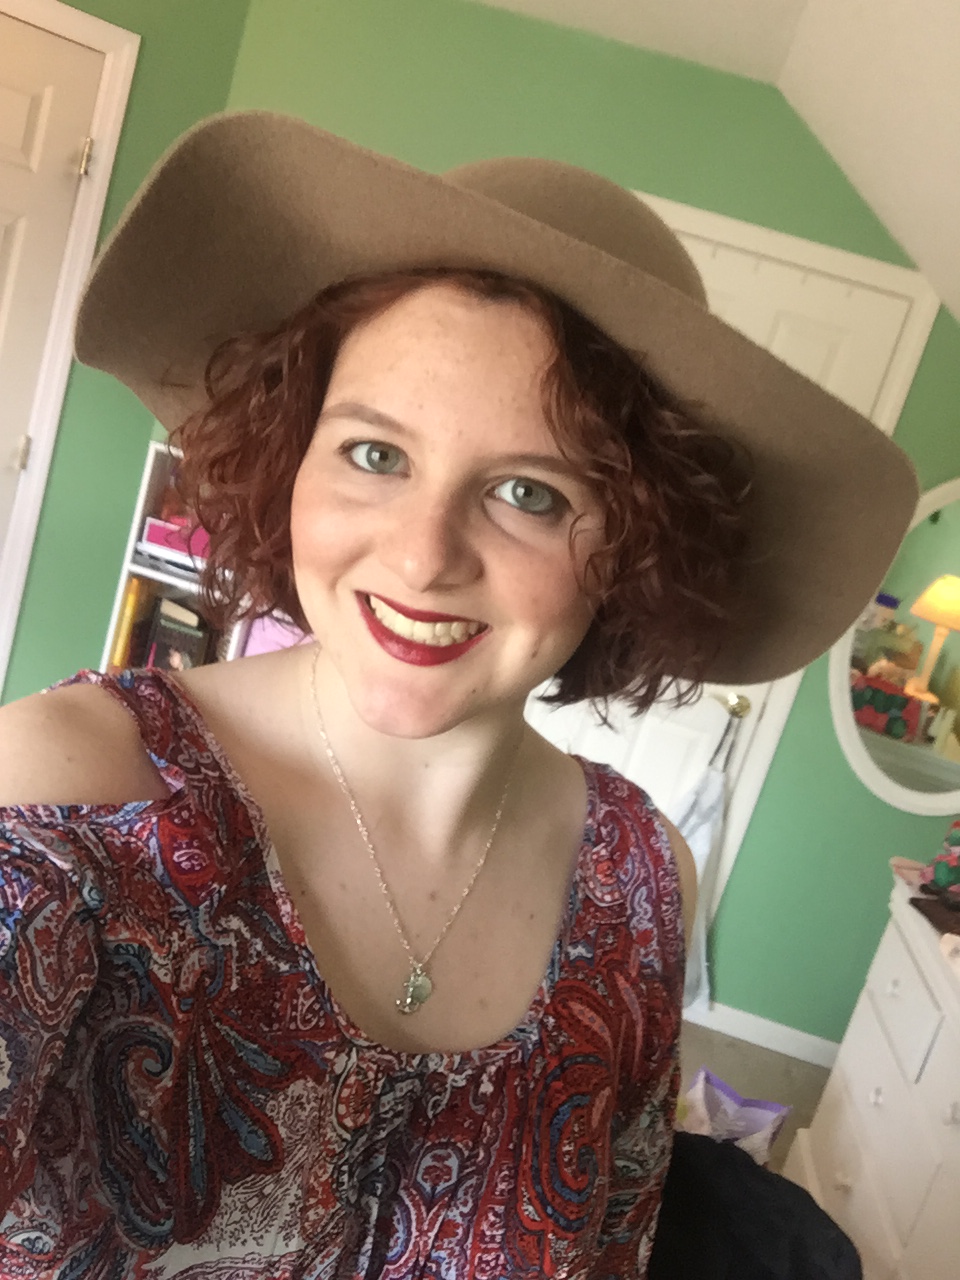 Introducing Our Newest Blogger: Kelly!